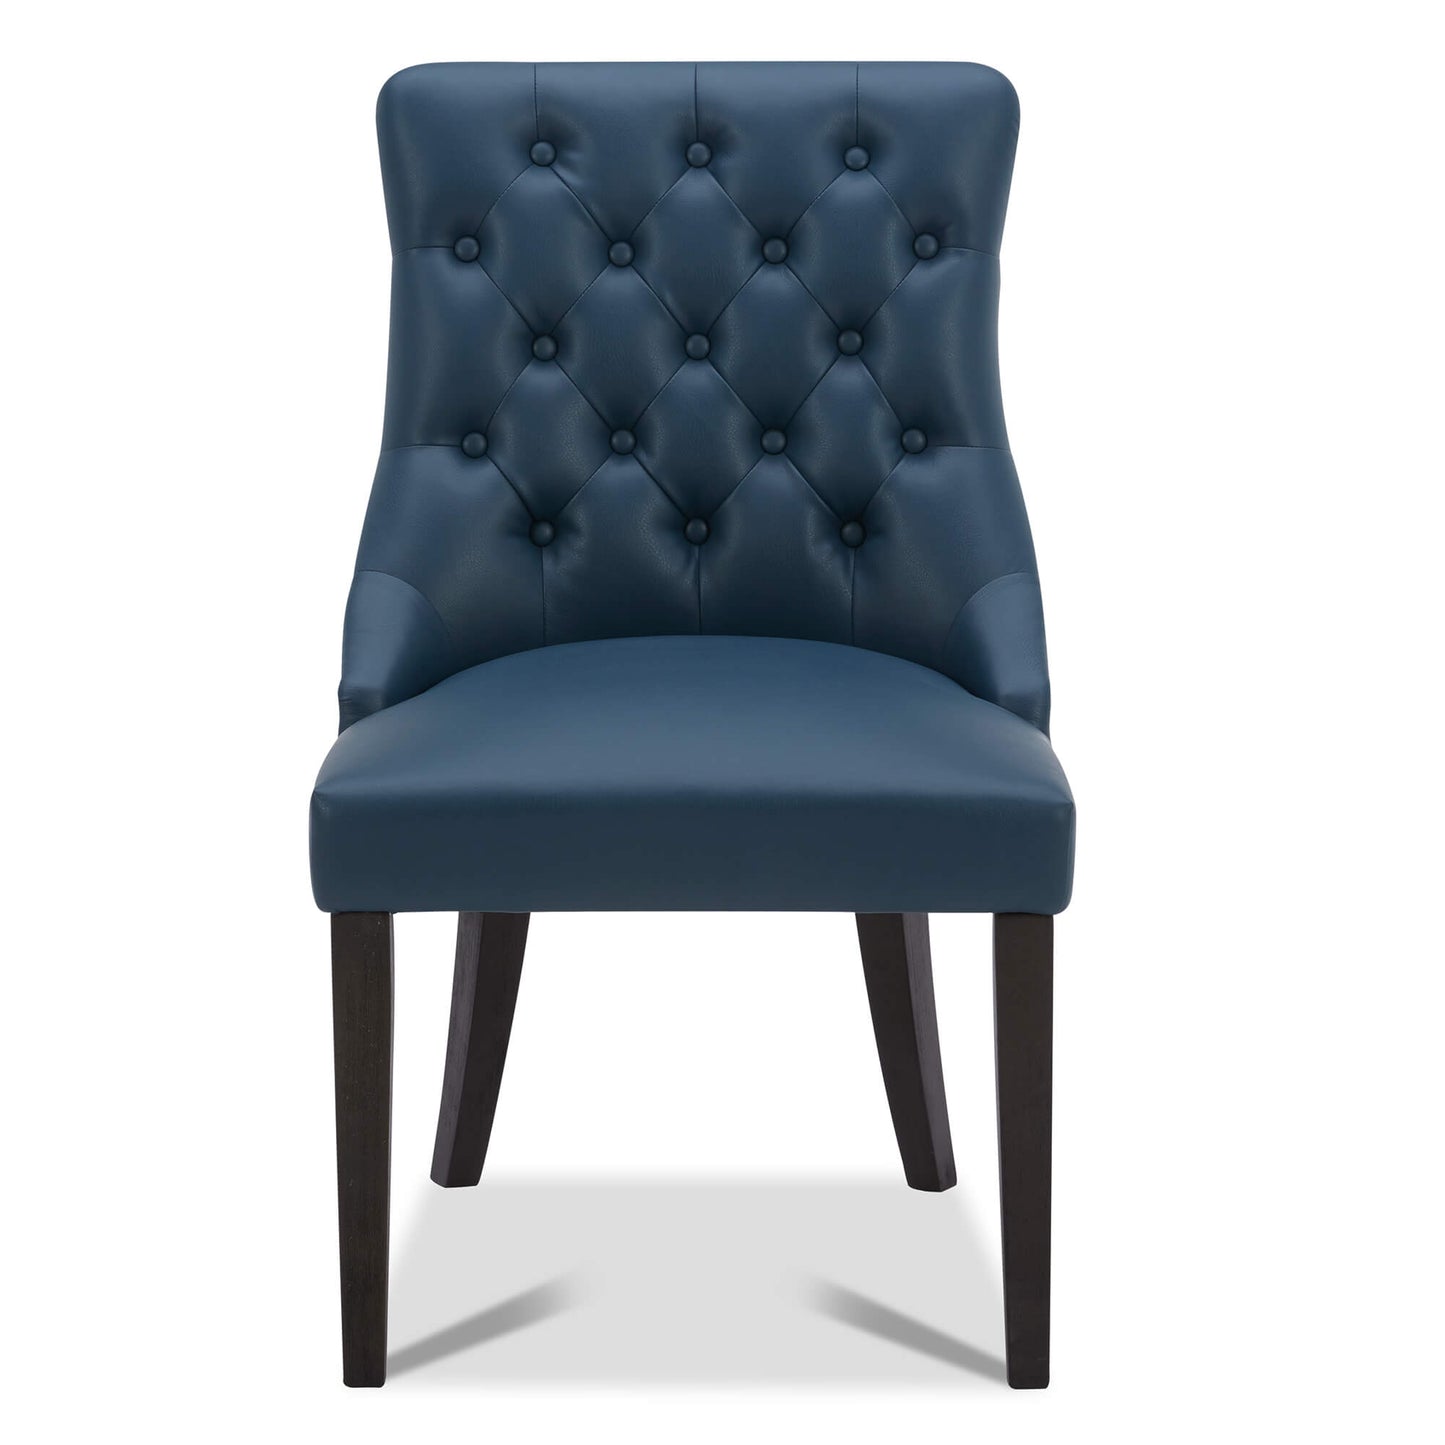 CHITA LIVING-Morgan Prime Tufted Dining Chair (Set of 2)-Dining Chairs-Faux Leather-Blue-